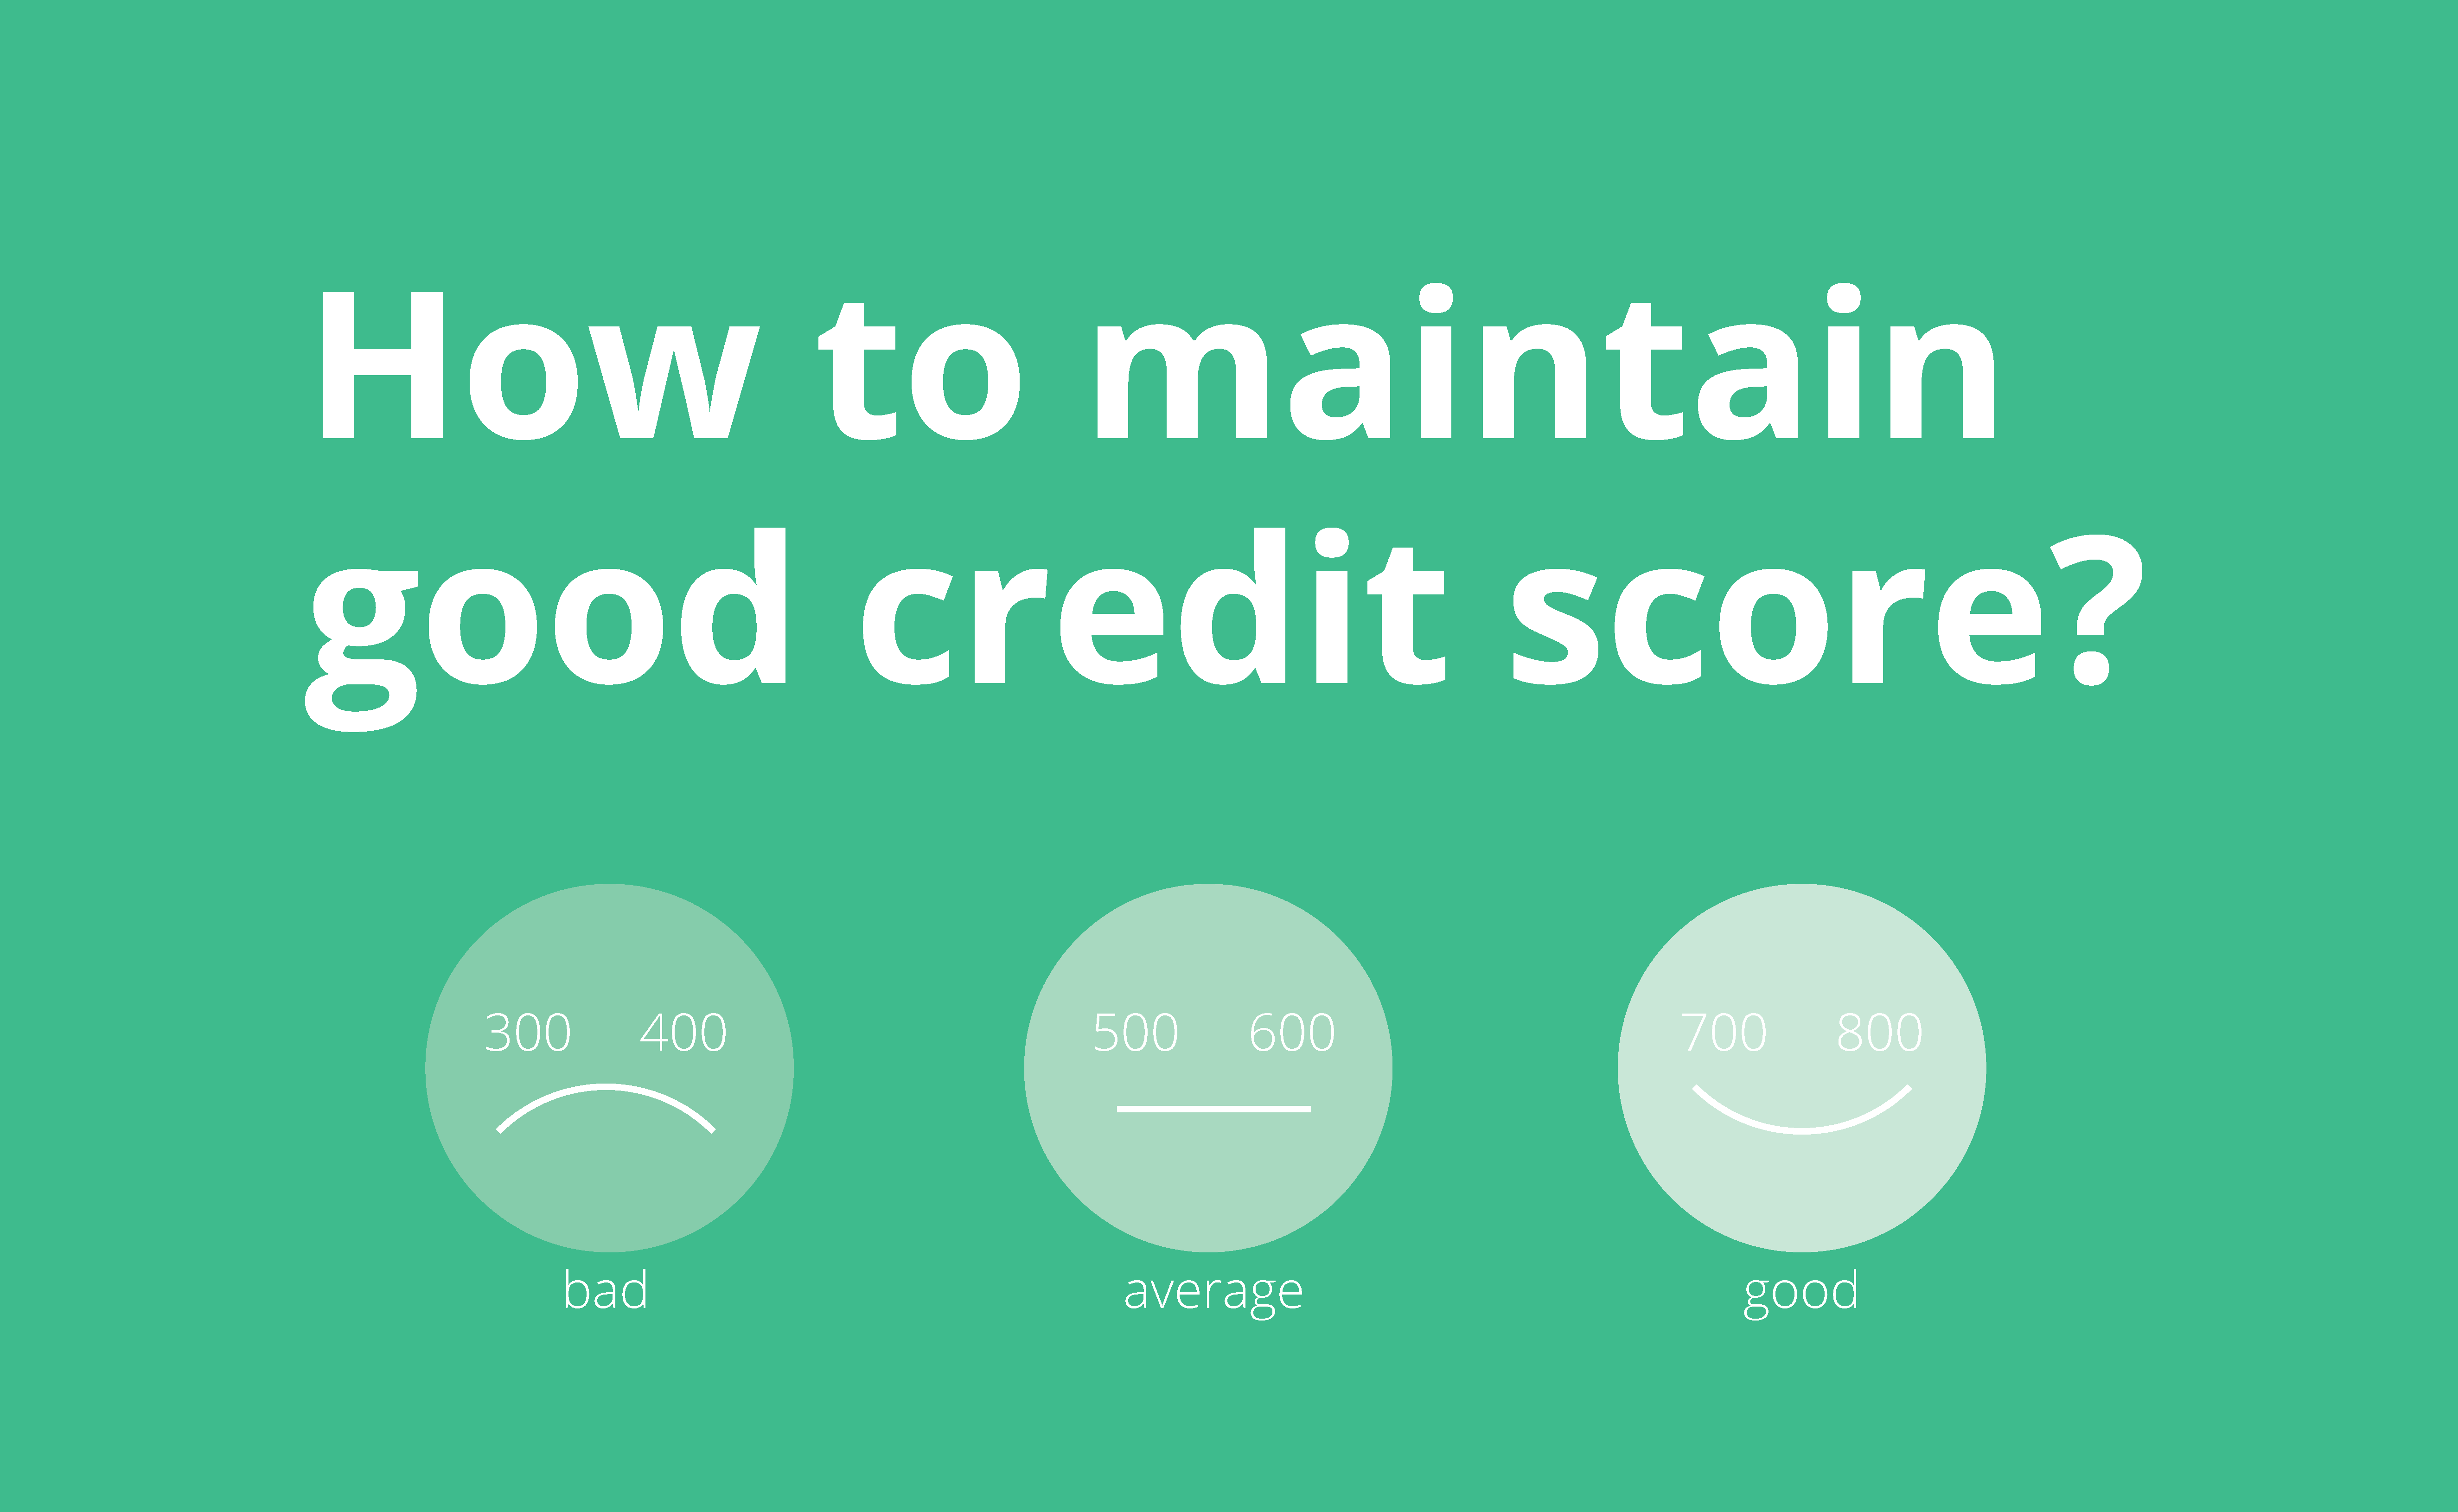 How to maintain good credit score